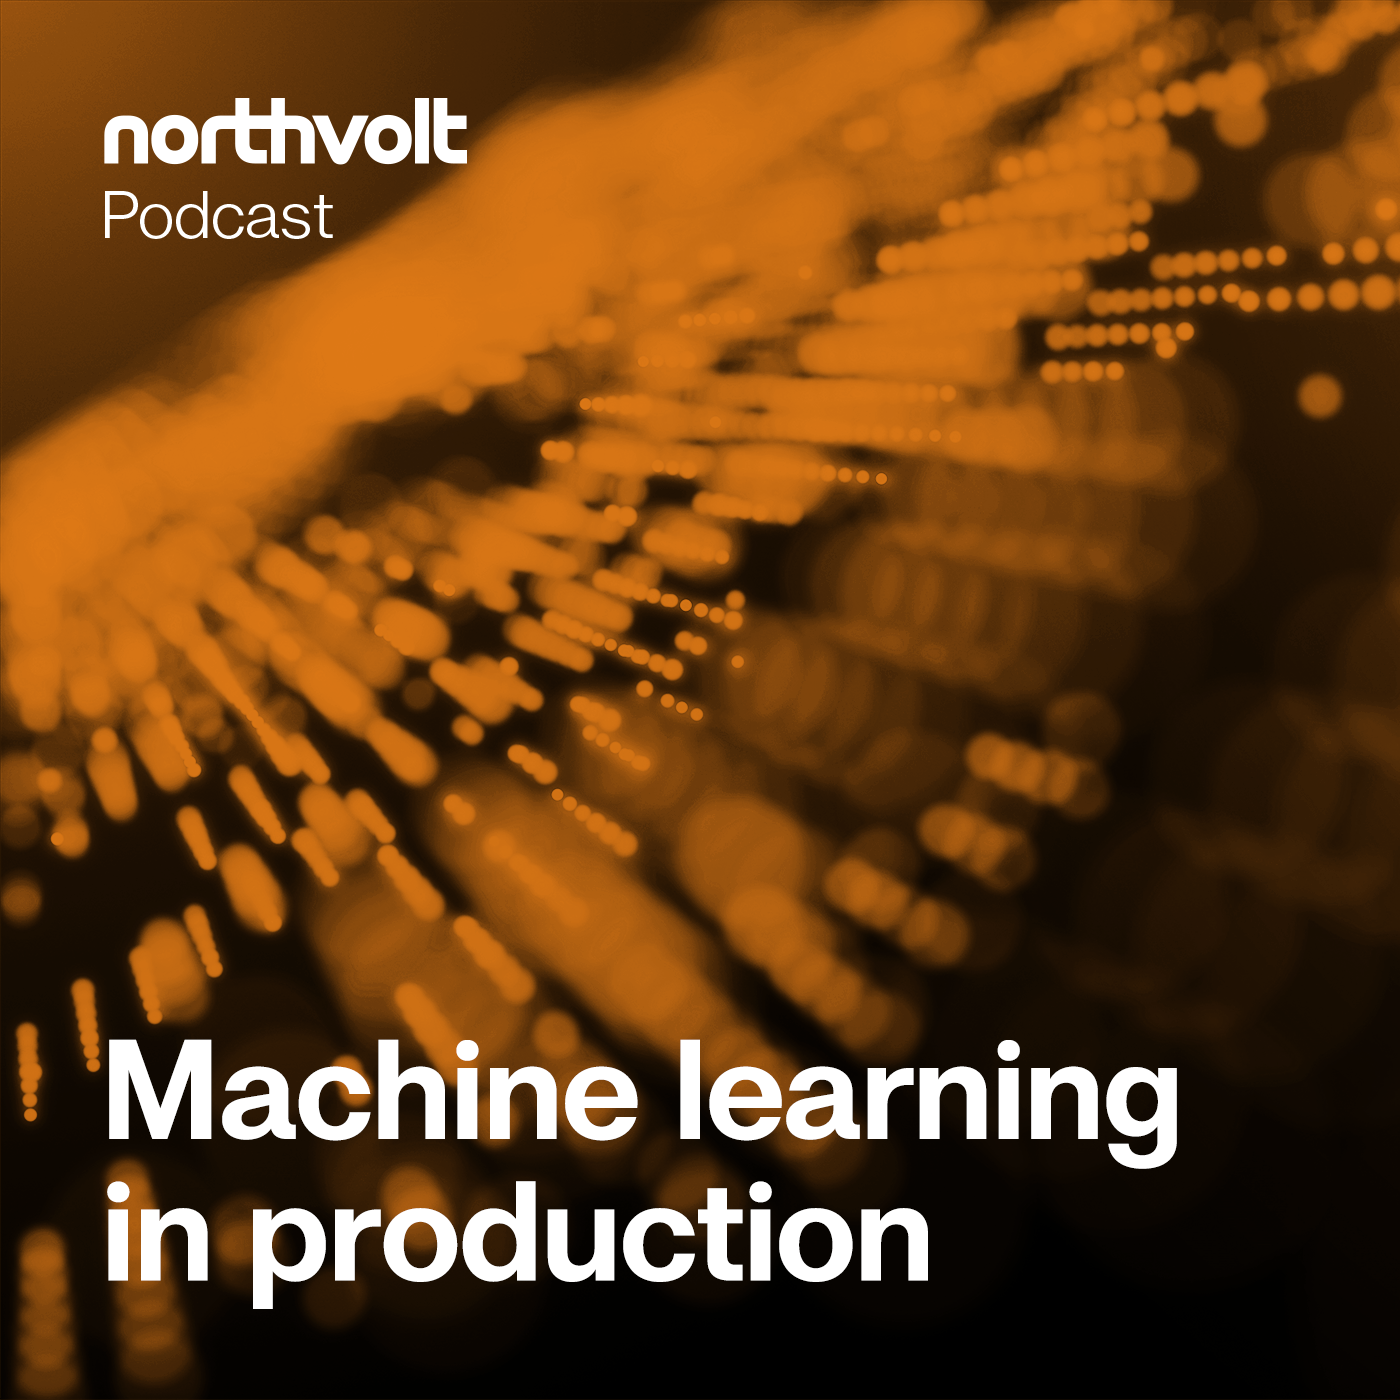 The future of energy: Machine learning in production